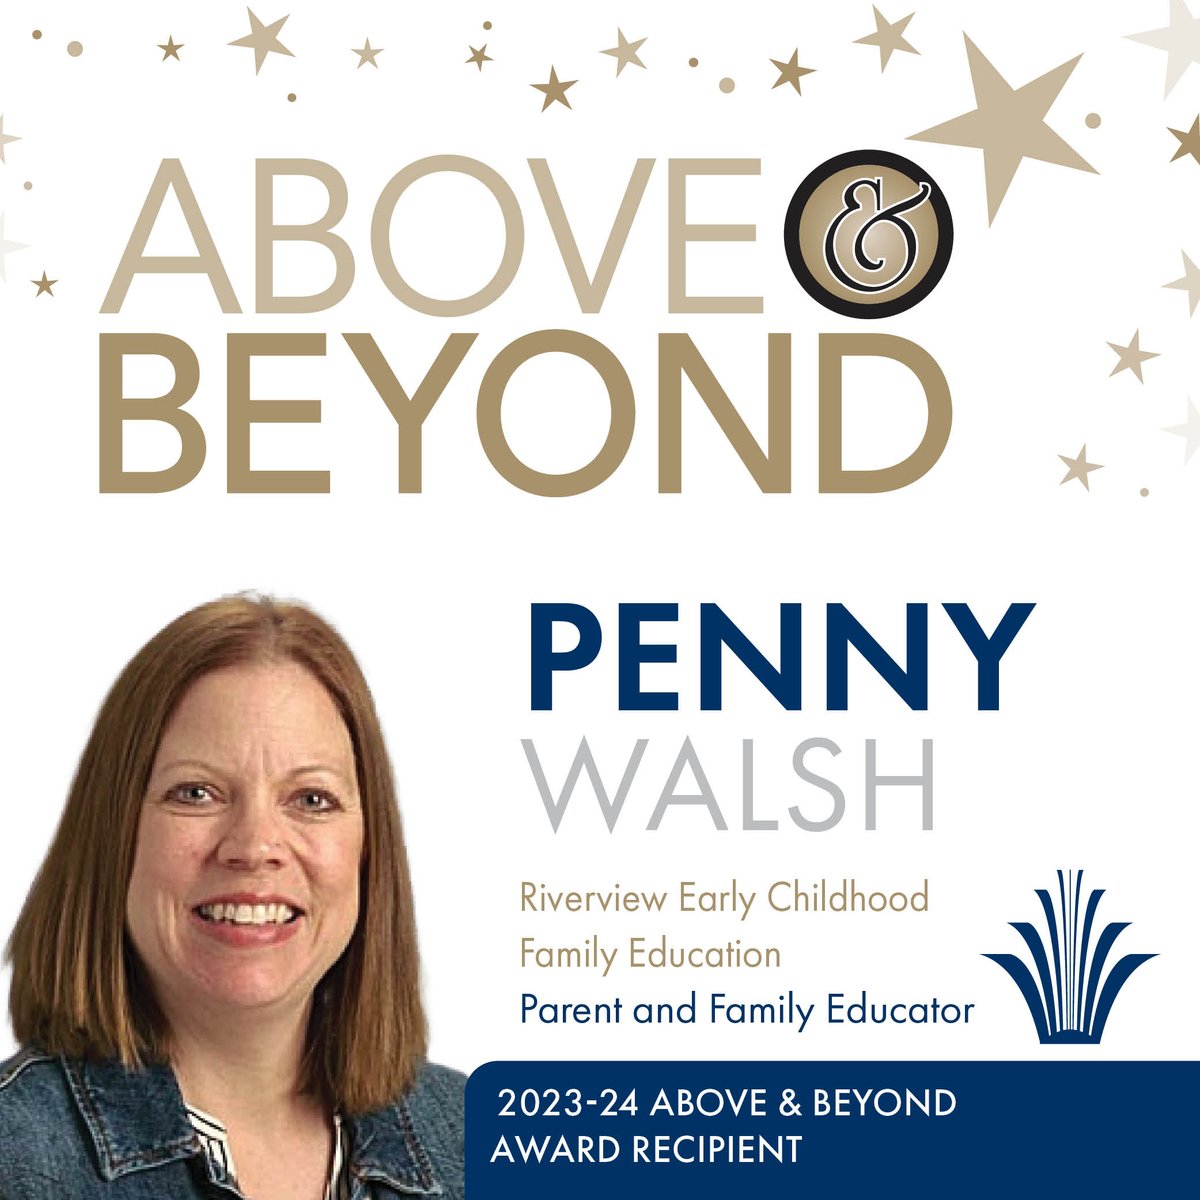 Congratulations to 2023-24 #AHSchools Above & Beyond Awards recipient: Penny Walsh! Walsh, an ECFE parent educator at Riverview Early Childhood Center, excels at building relationships with families and offering support to parents and children. Read more: bit.ly/49DvBOM